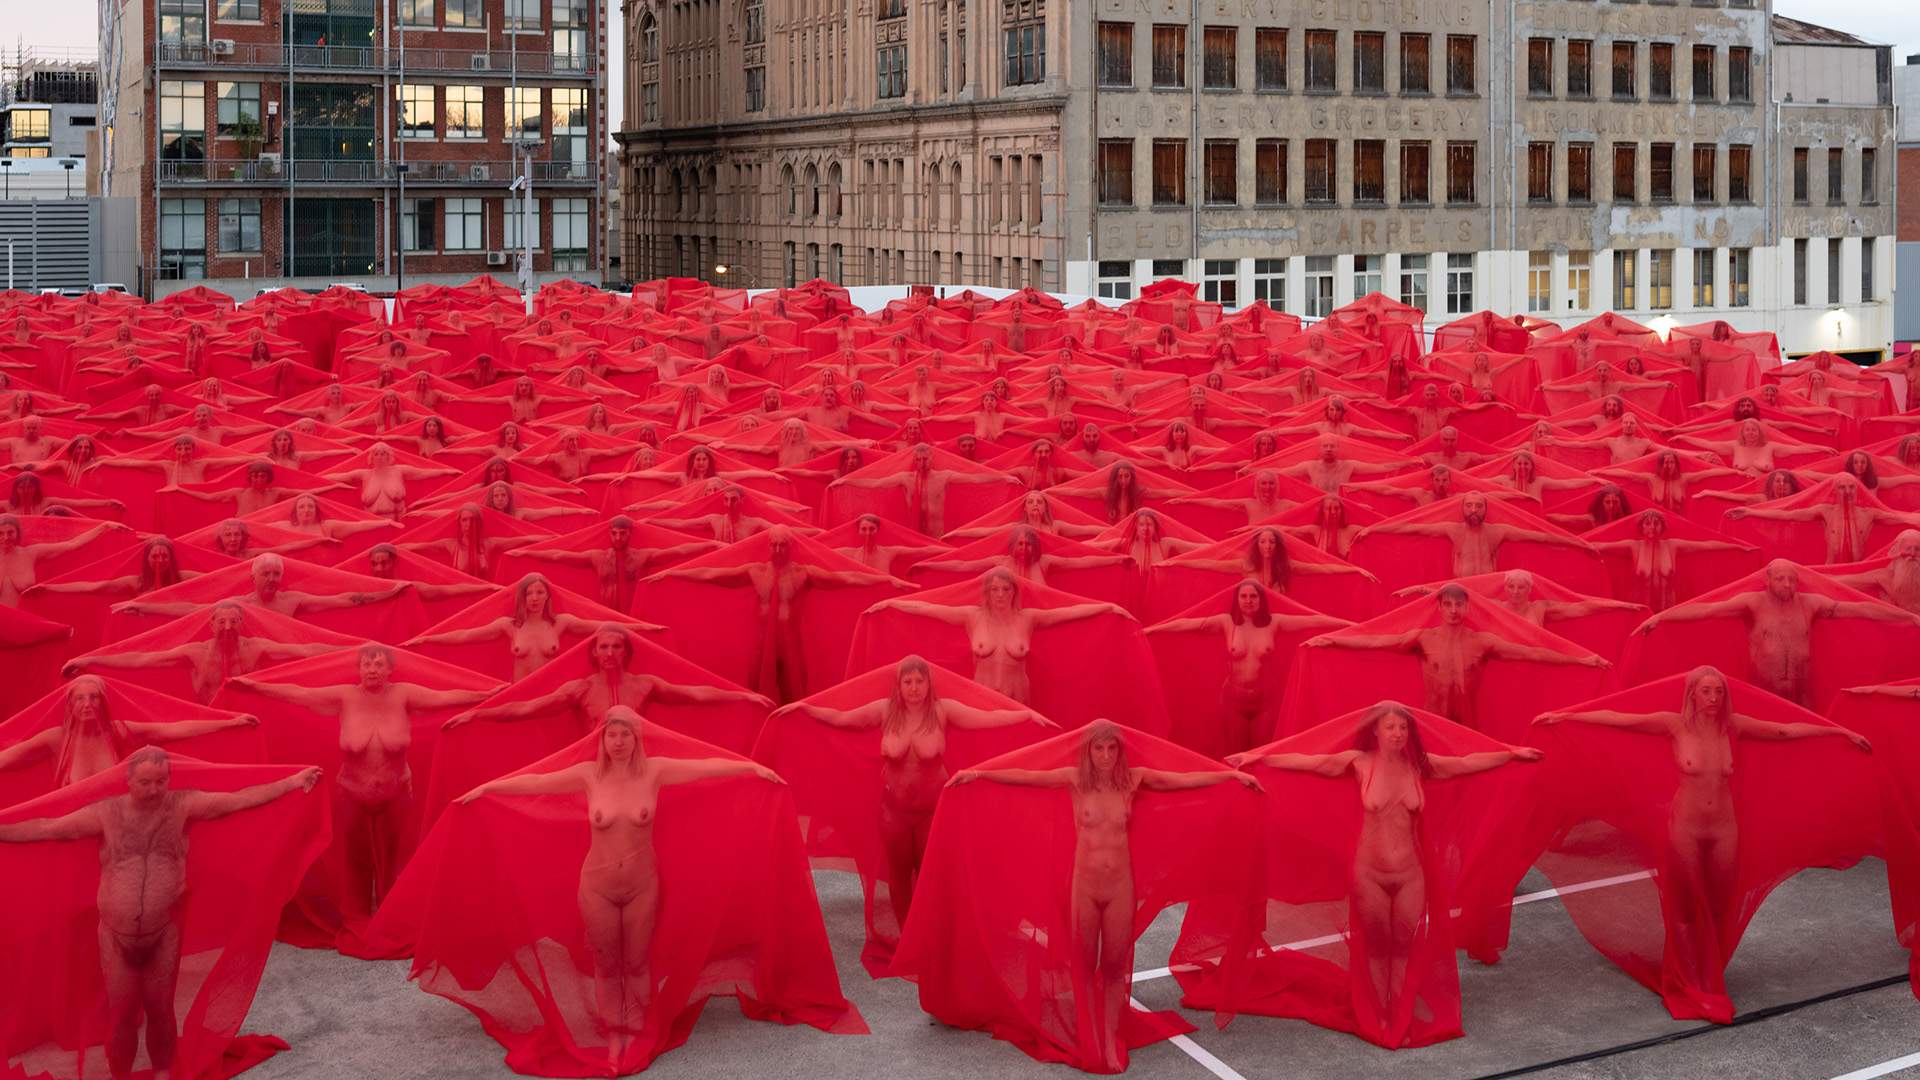 Artist Spencer Tunick Has Revealed the Multi-Coloured Images from Melbourne's Mass Nude Photo Shoot